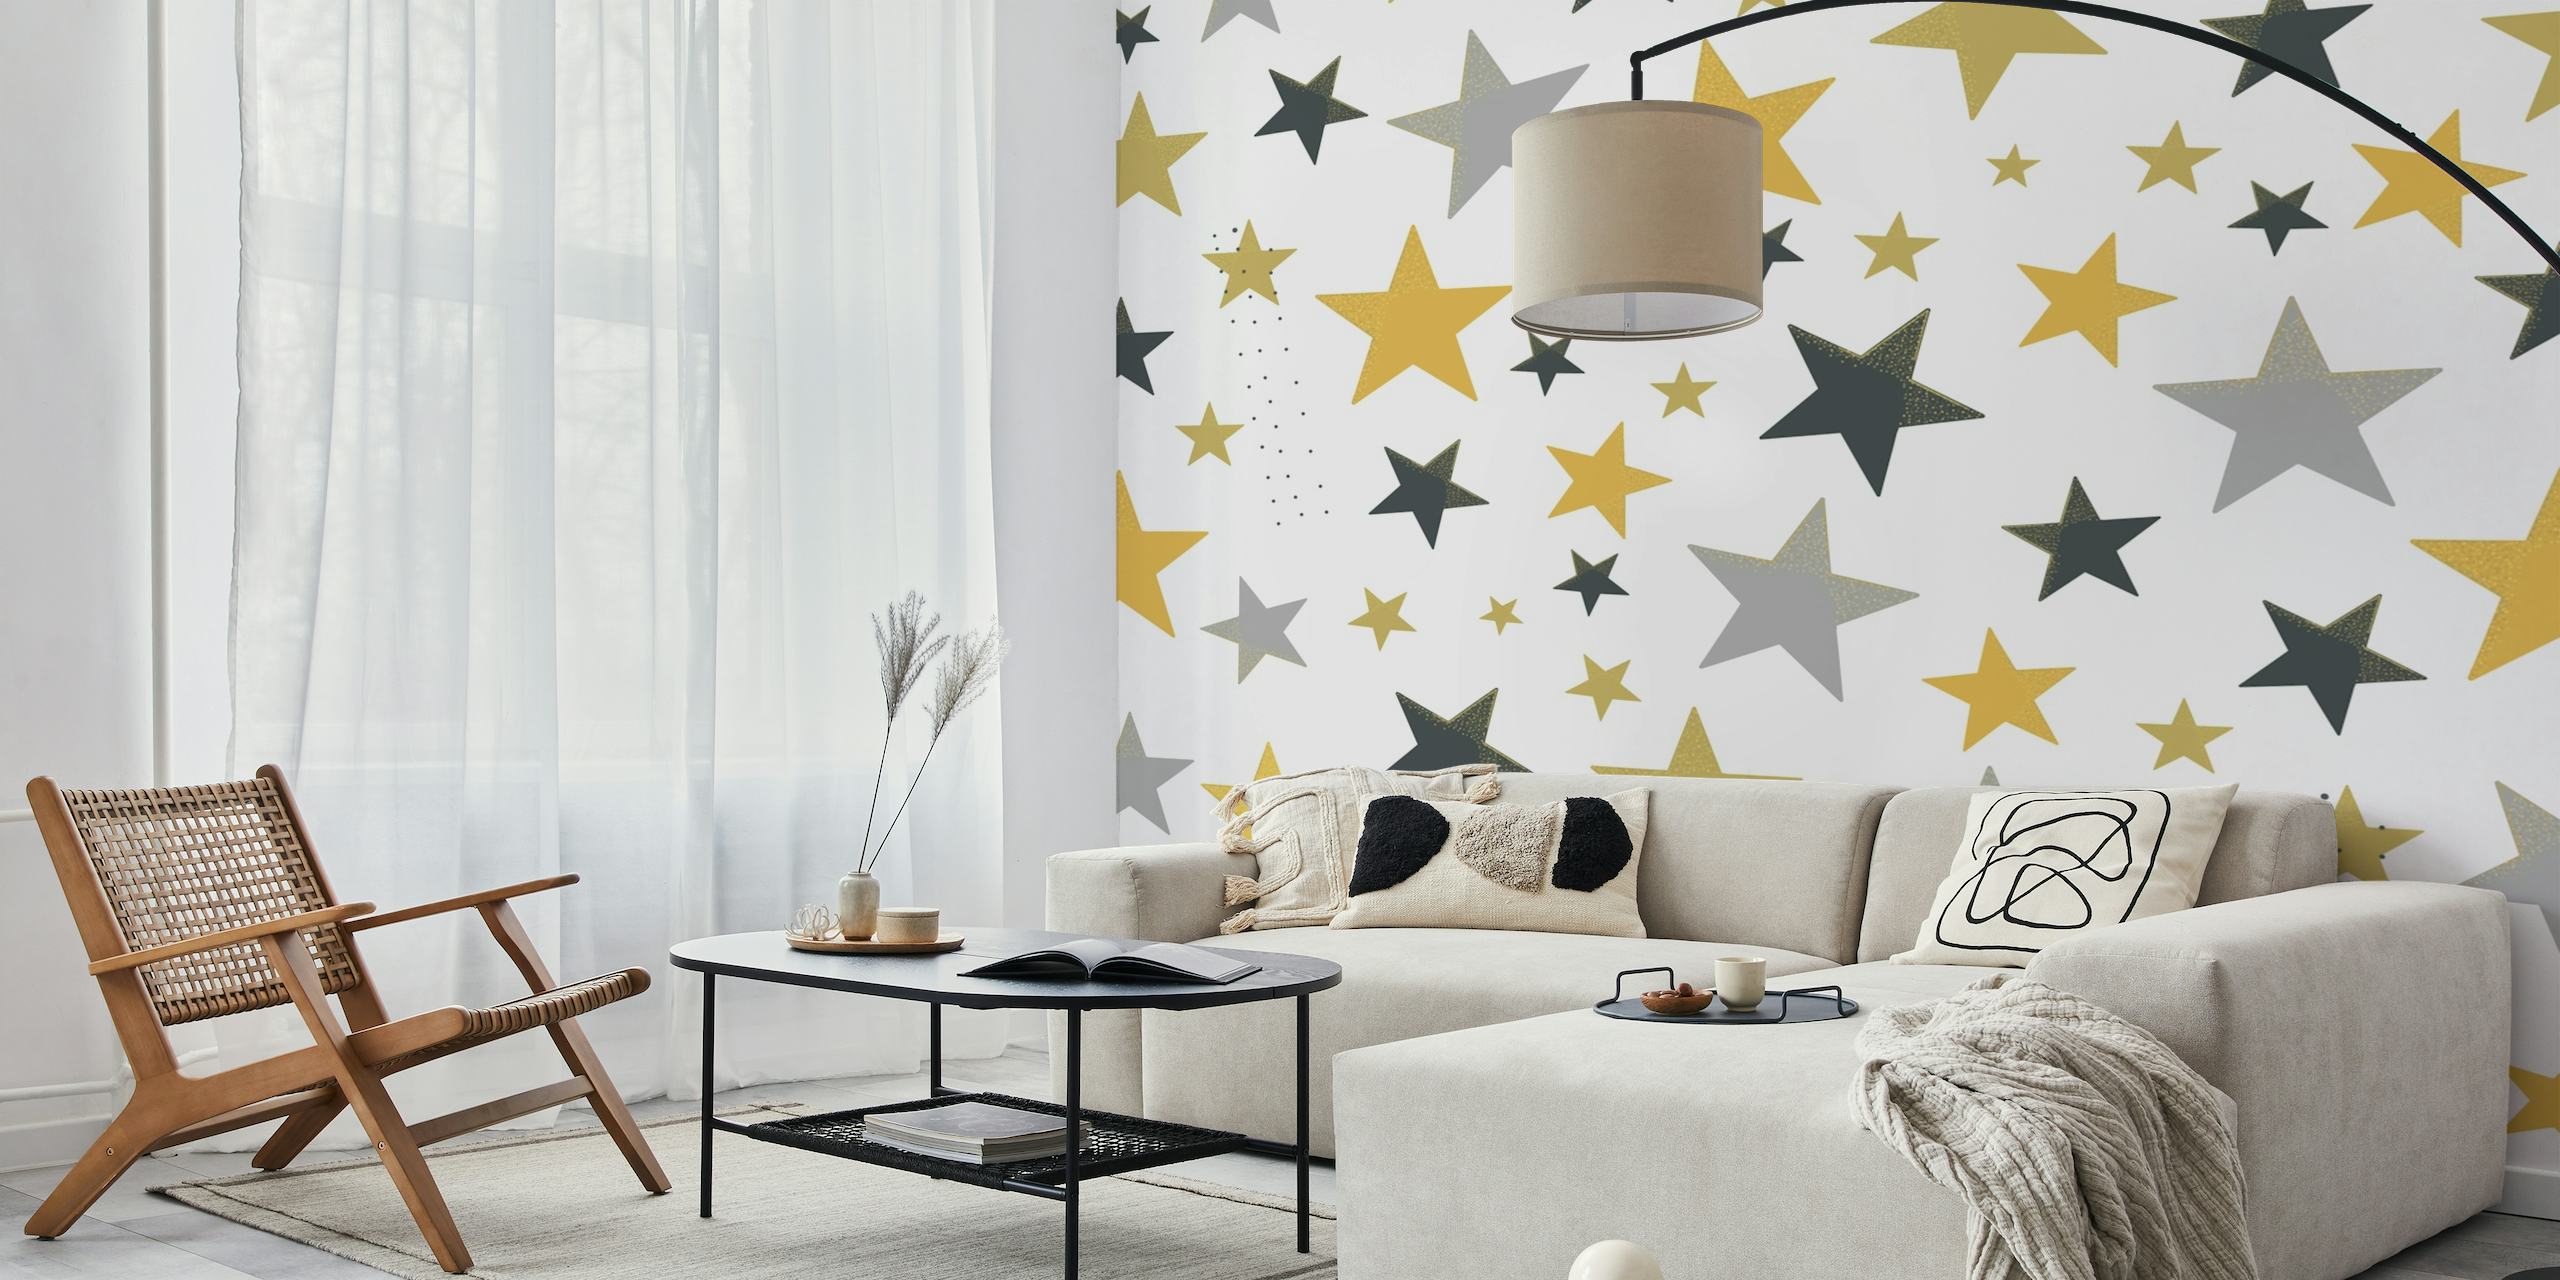 Shining golden and silver star papiers peint